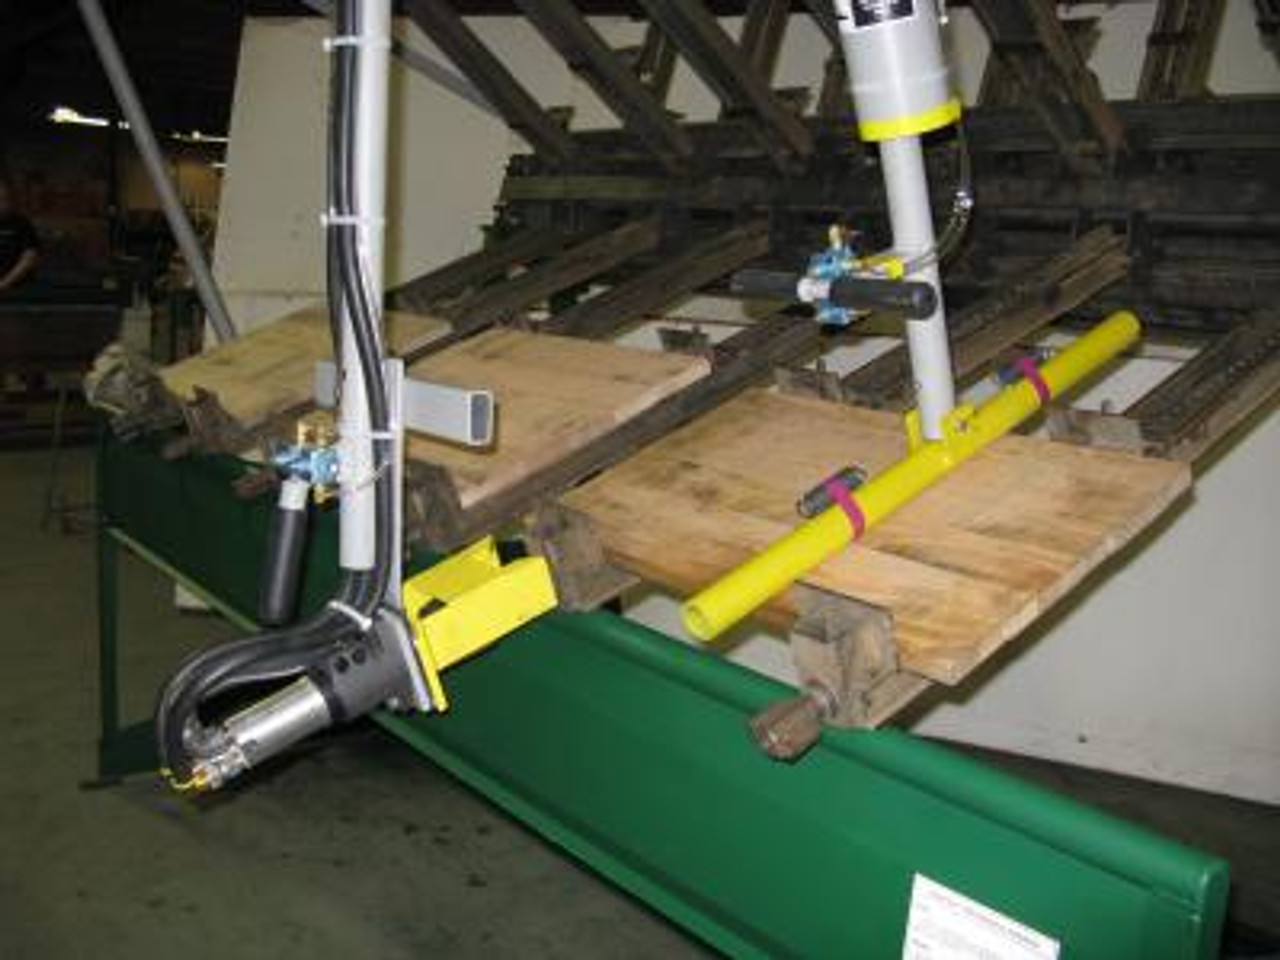 Taylor Manufacturing's Taylor 6-16 Woodworking Clamps System